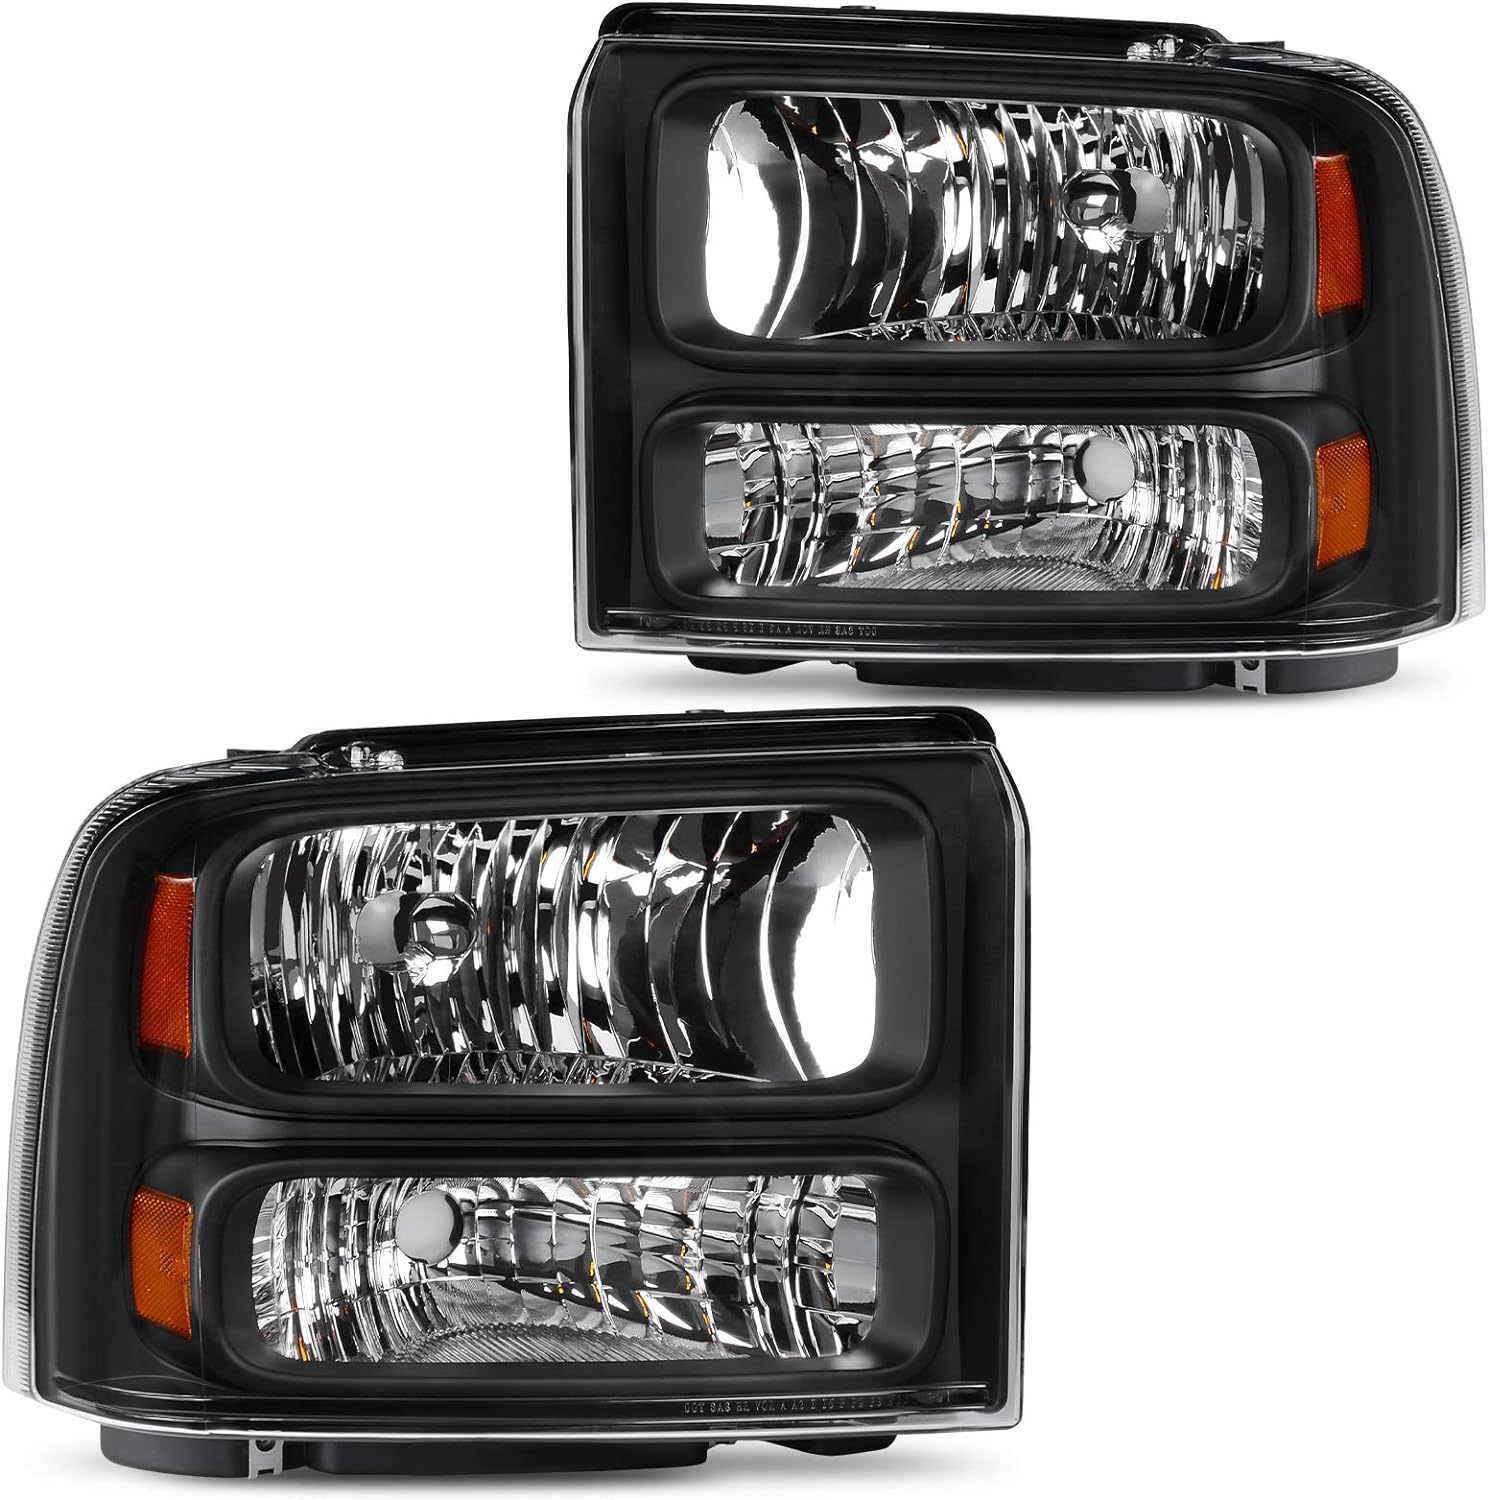 DWVO Headlights Assembly Compatible with 2005-2007 Ford F250 F350 F450 F550 Super Duty/05 Ford Excursion Black Housing Clear Lens